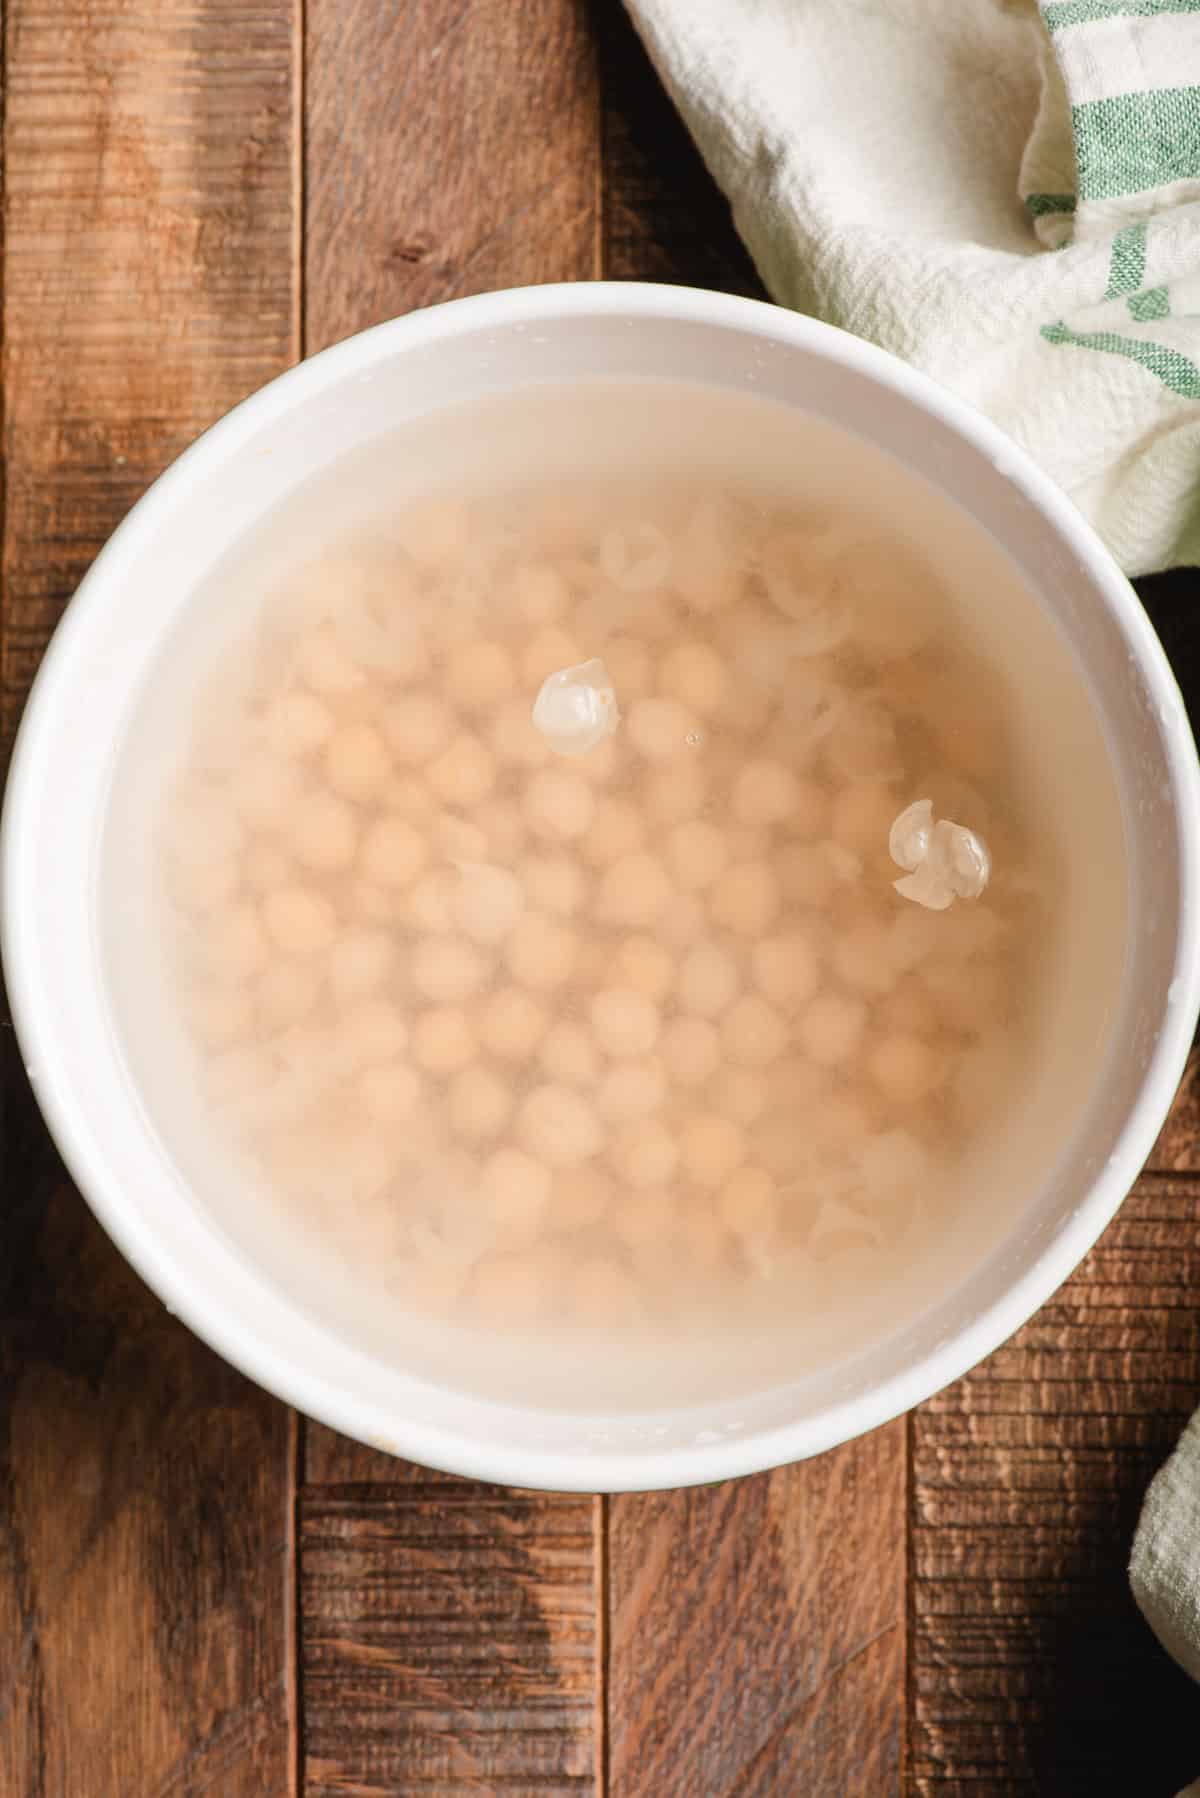 Chickpeas soaking in a bowl.